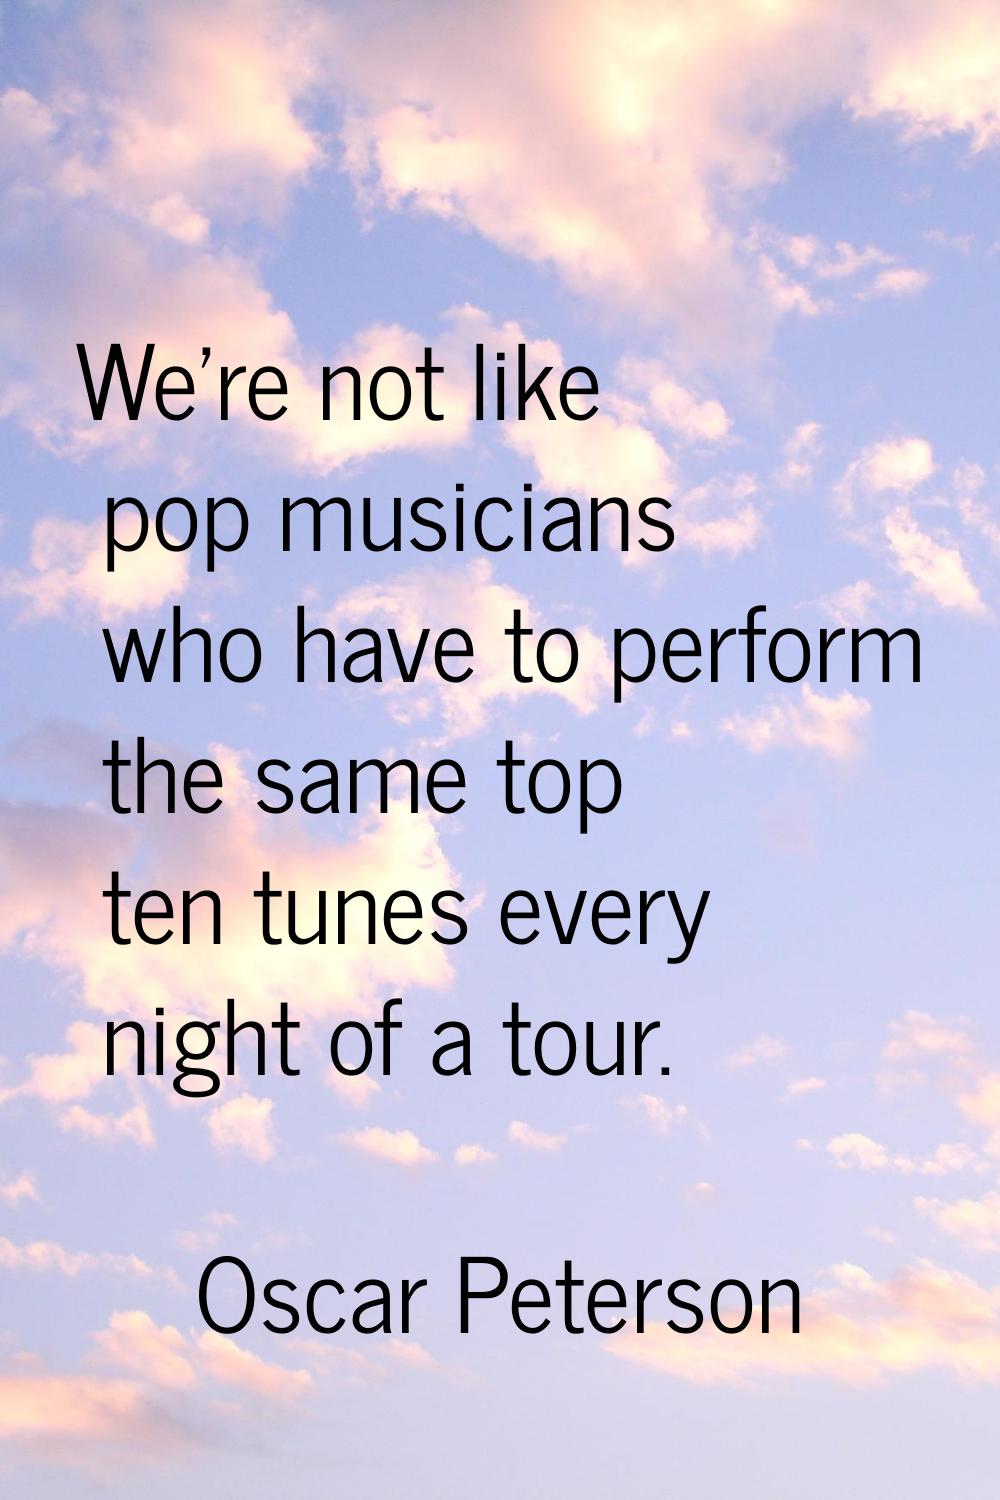 We're not like pop musicians who have to perform the same top ten tunes every night of a tour.